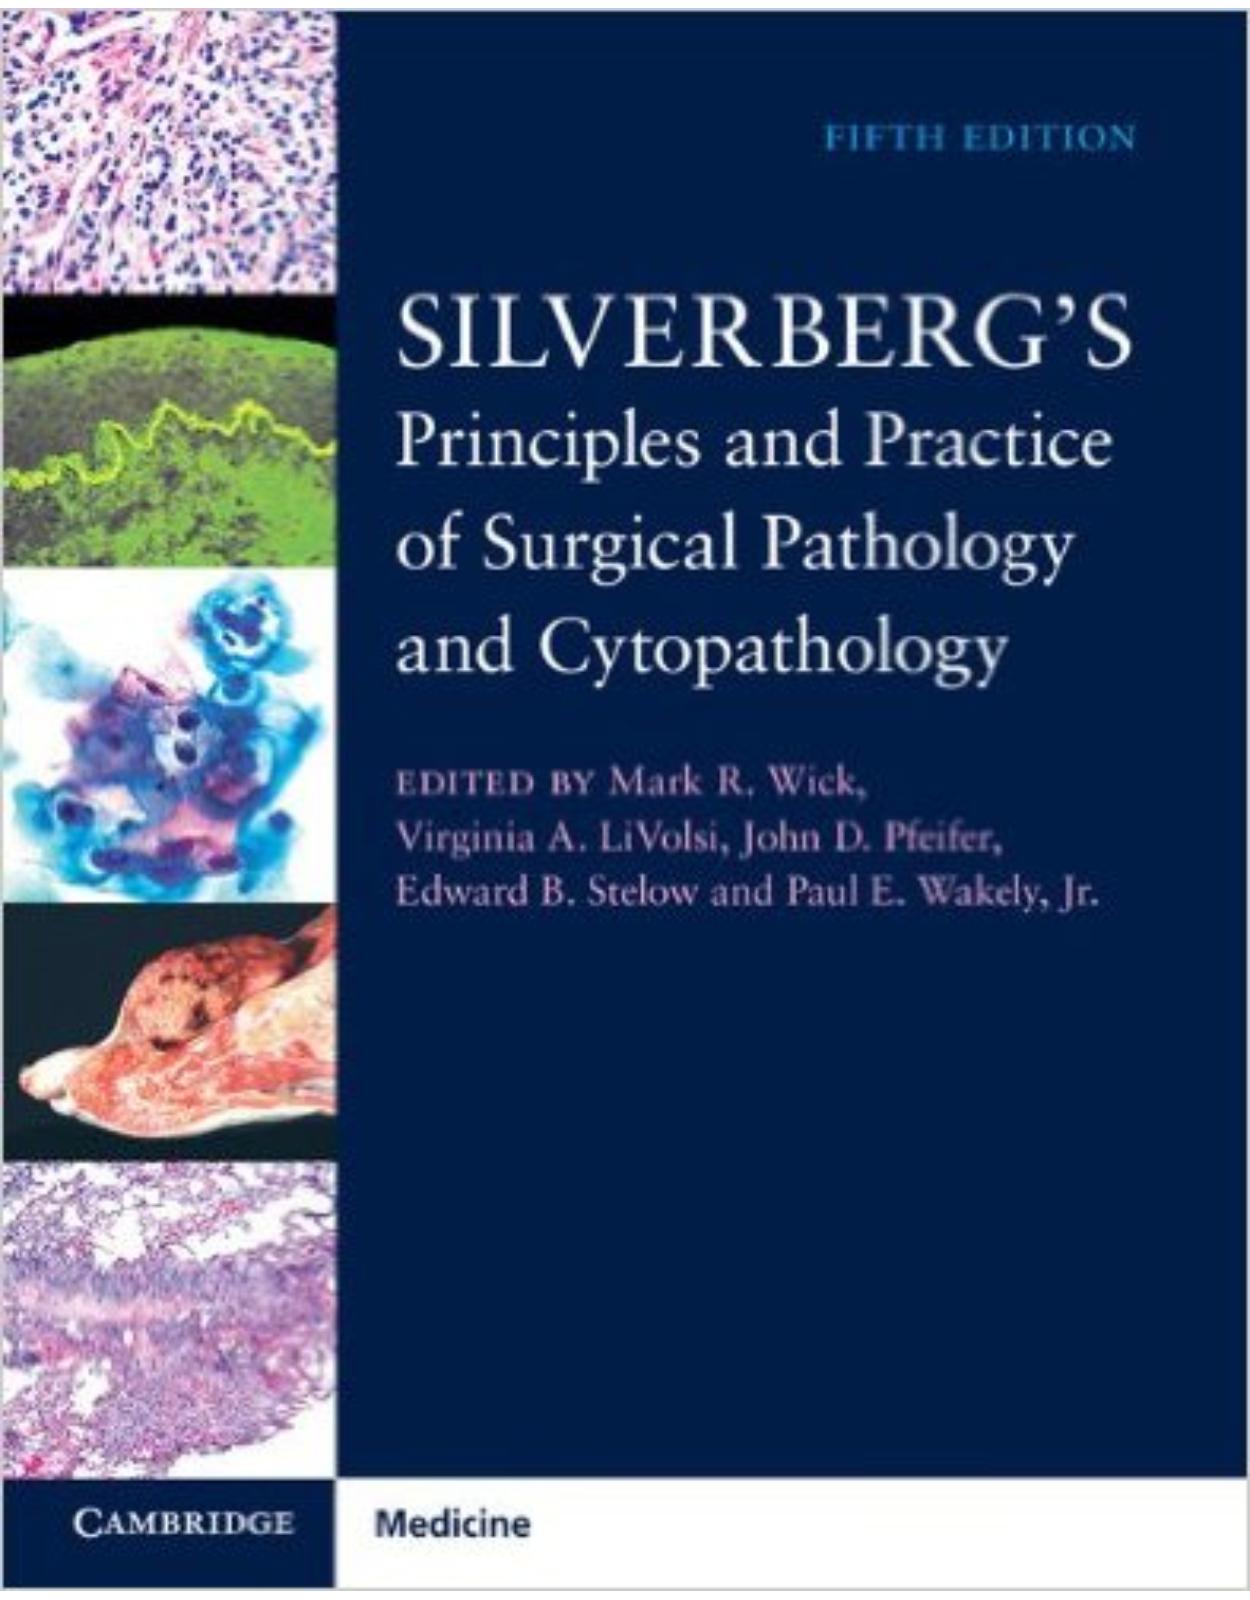 Silverberg's Principles and Practice of Surgical Pathology and Cytopathology 4 Volume Set with Online Access 5th Edition